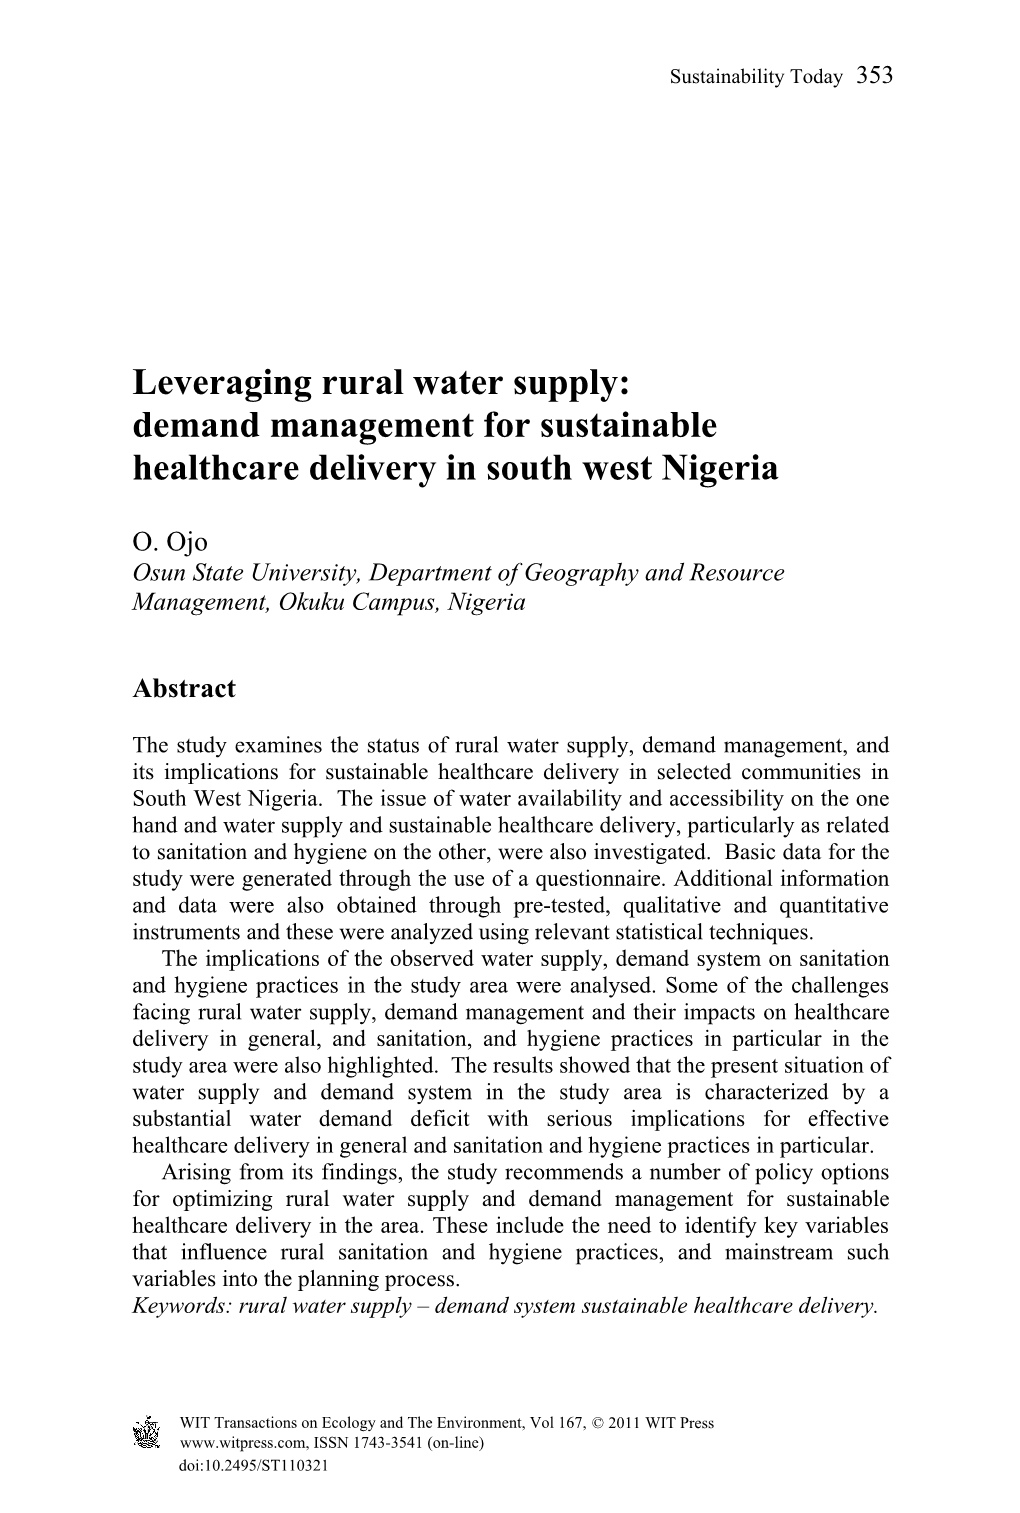 Leveraging Rural Water Supply: Demand Management for Sustainable Healthcare Delivery in South West Nigeria